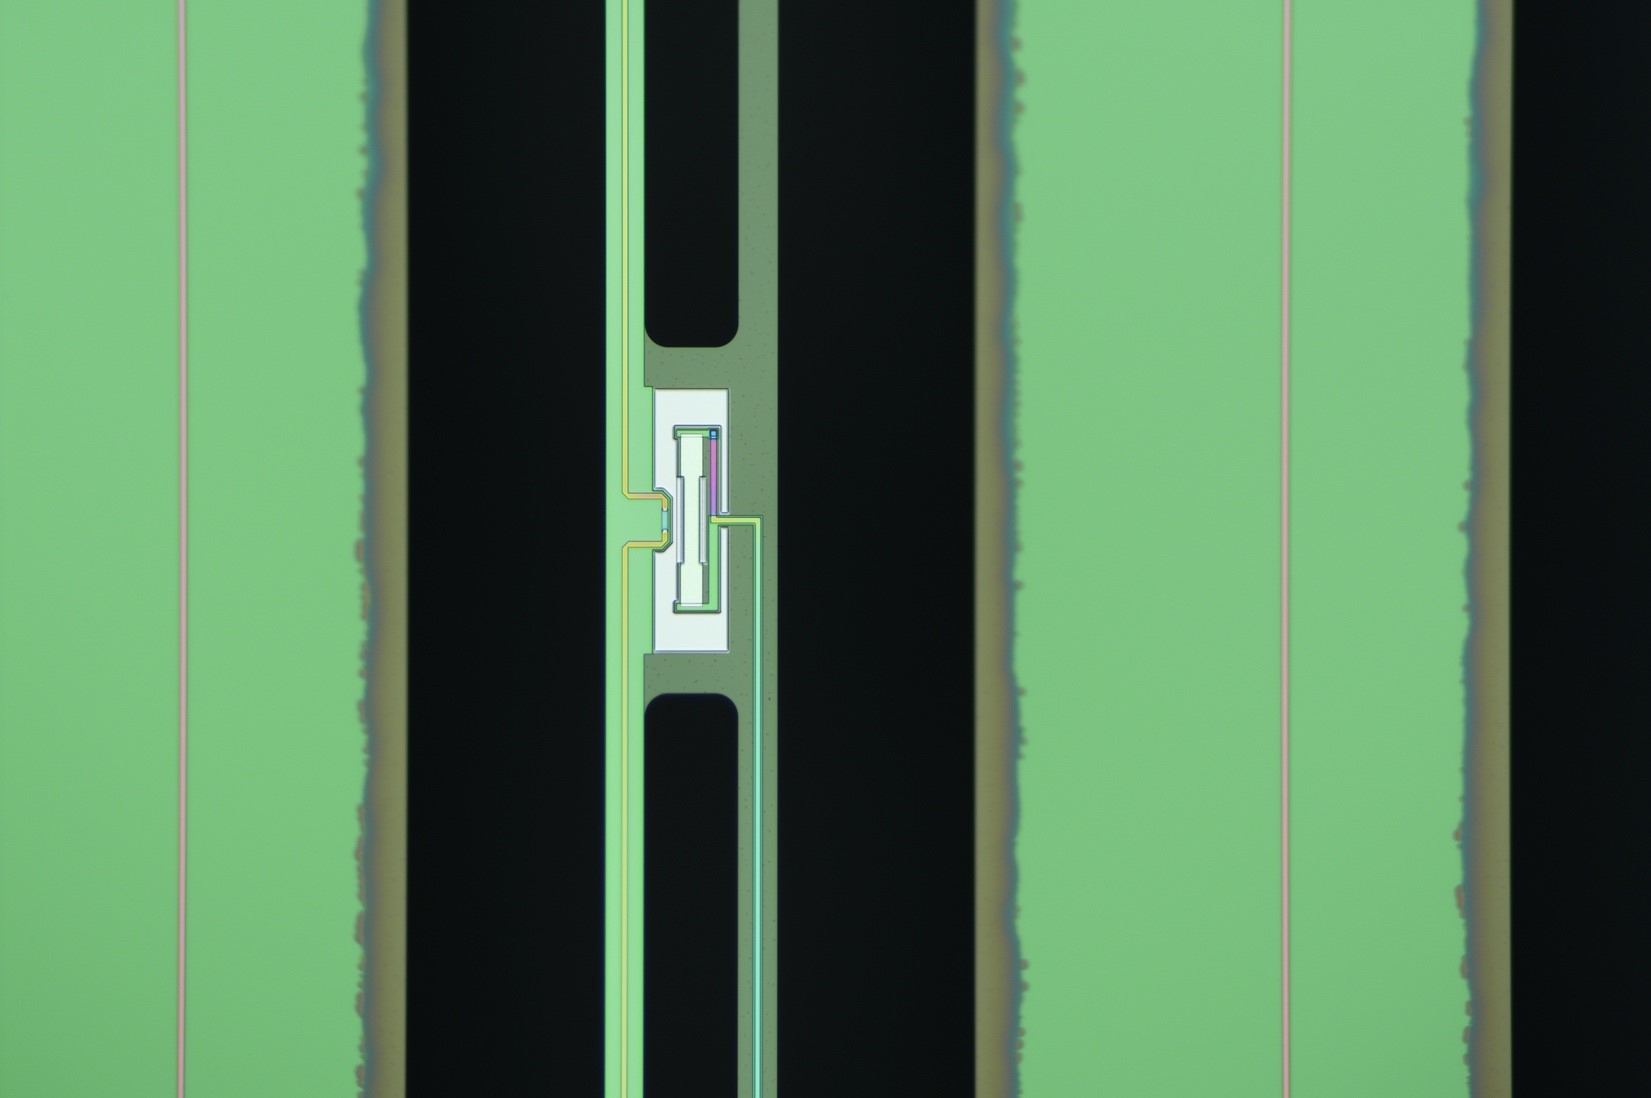 Metallic rectangle is surrounded by green and black vertical stripes of varying widths. 